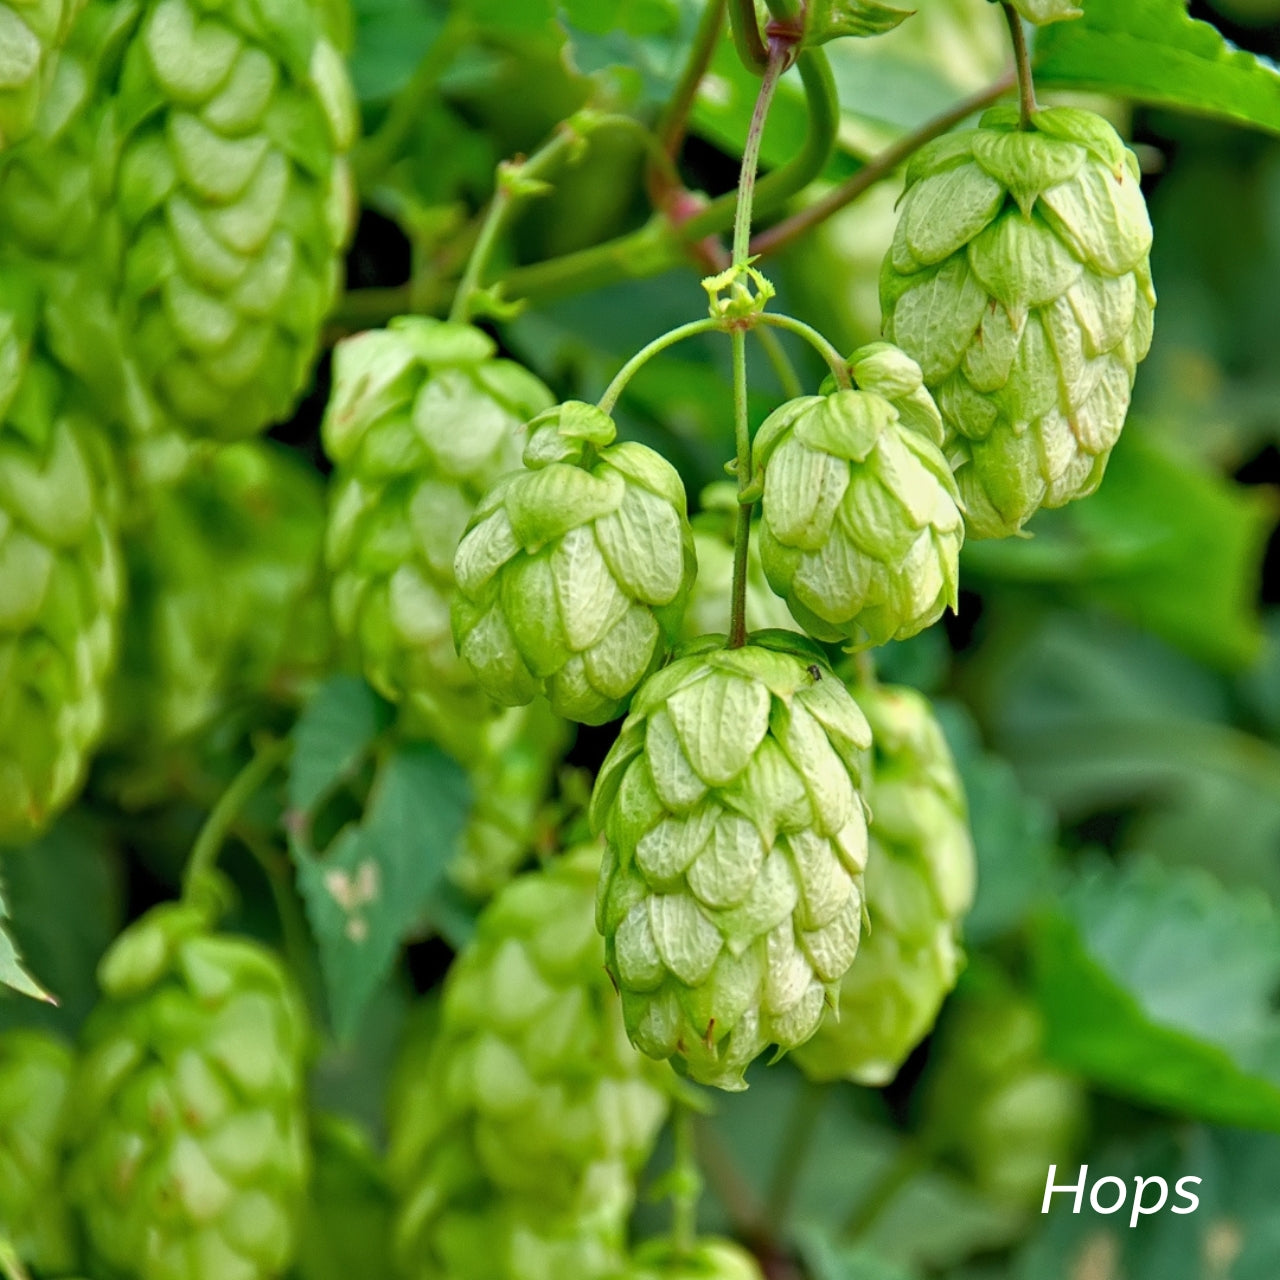 Hops flowers hanging from plant. 